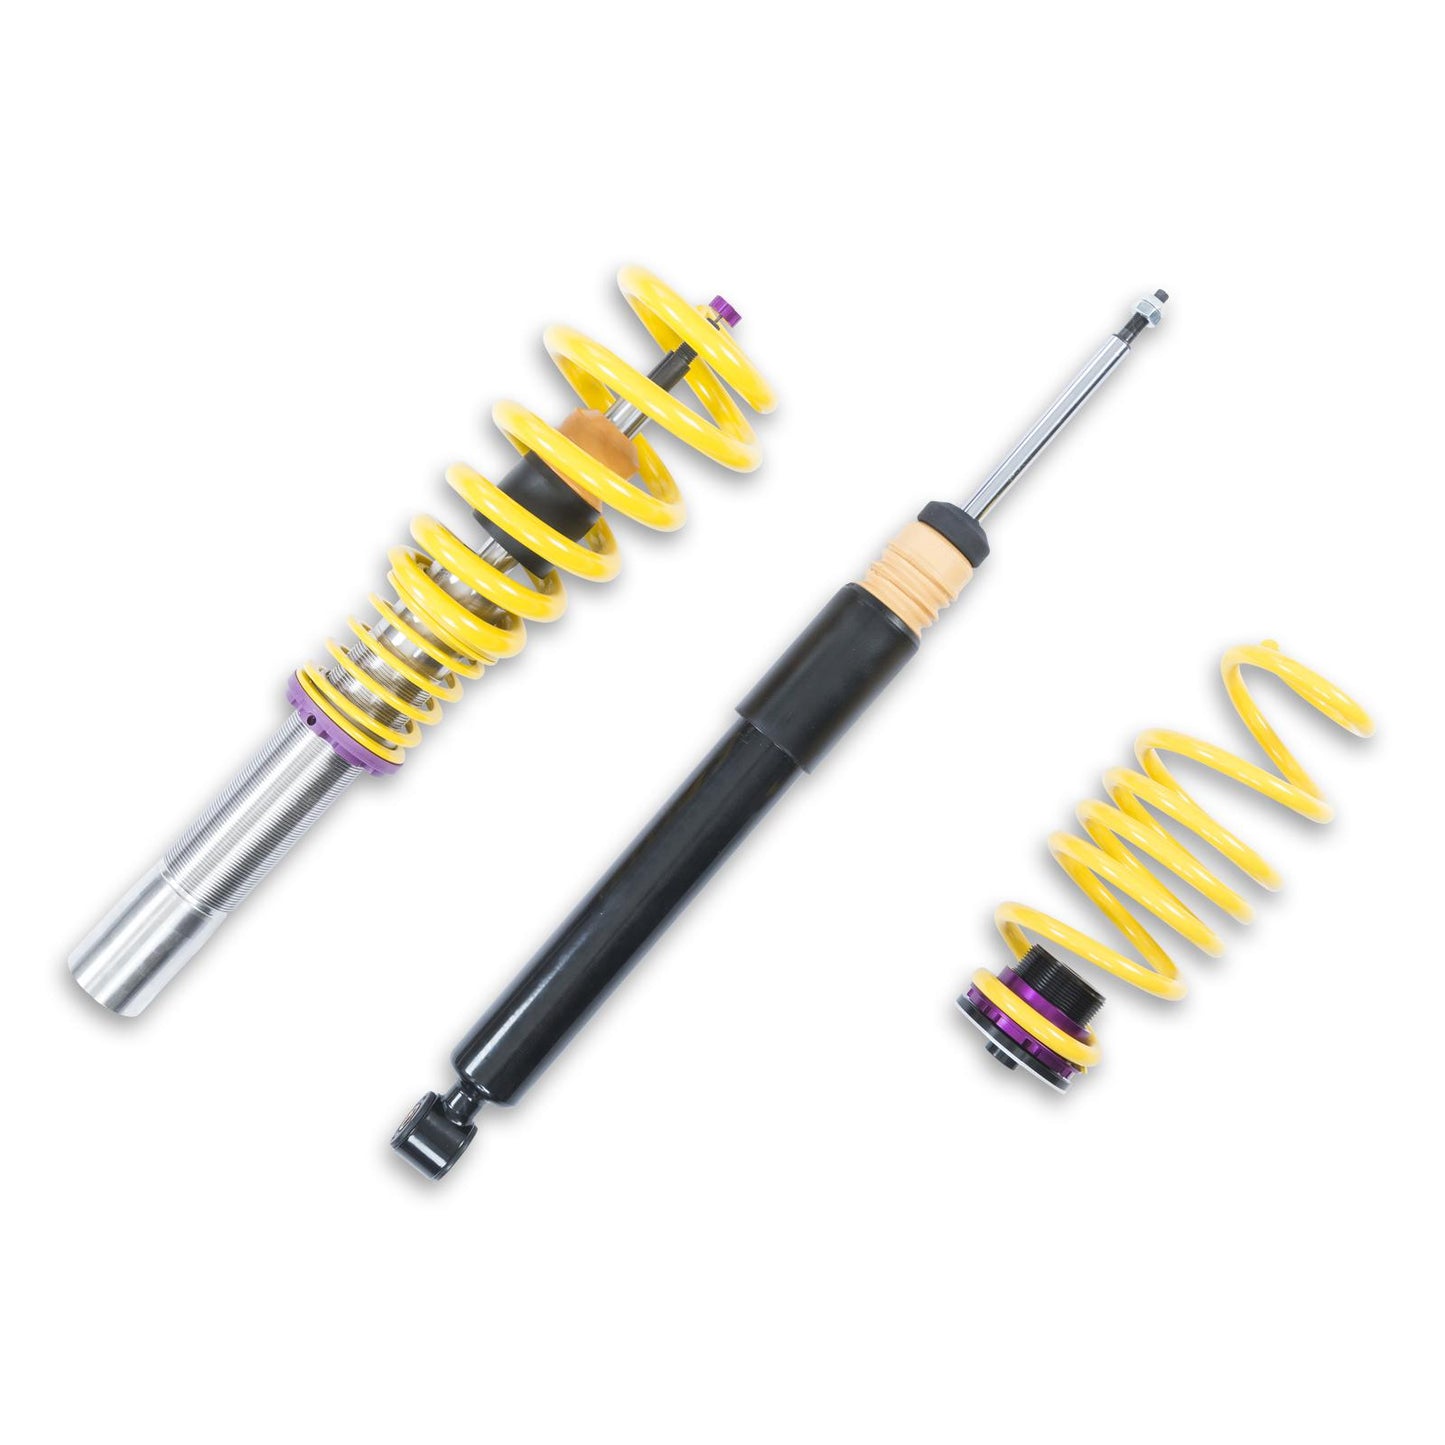 KW Audi B7 B8 B8.5 Variant 2 Coilover kit (A4 & A5) | ML Performance UK 